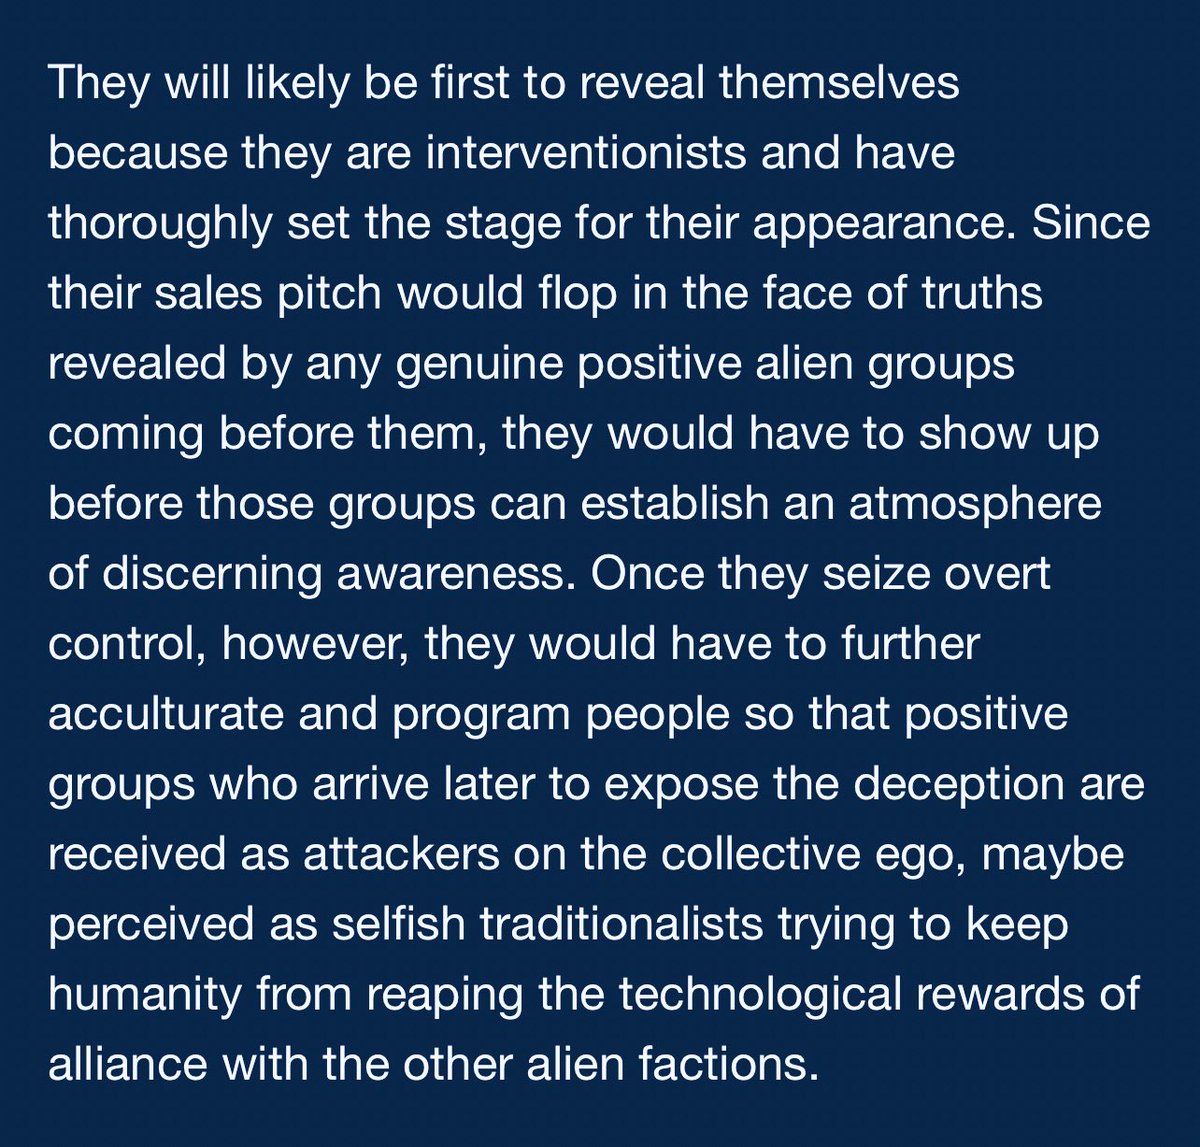 Humans are looking to the skies to be saved by the #aliens, however, positive factions are unlikely to respond. It's much more likely to be the negative interventionalists prepping us for #disclosure. 

We should be careful what we wish for. 

#ufotwitter #ufoX #uap